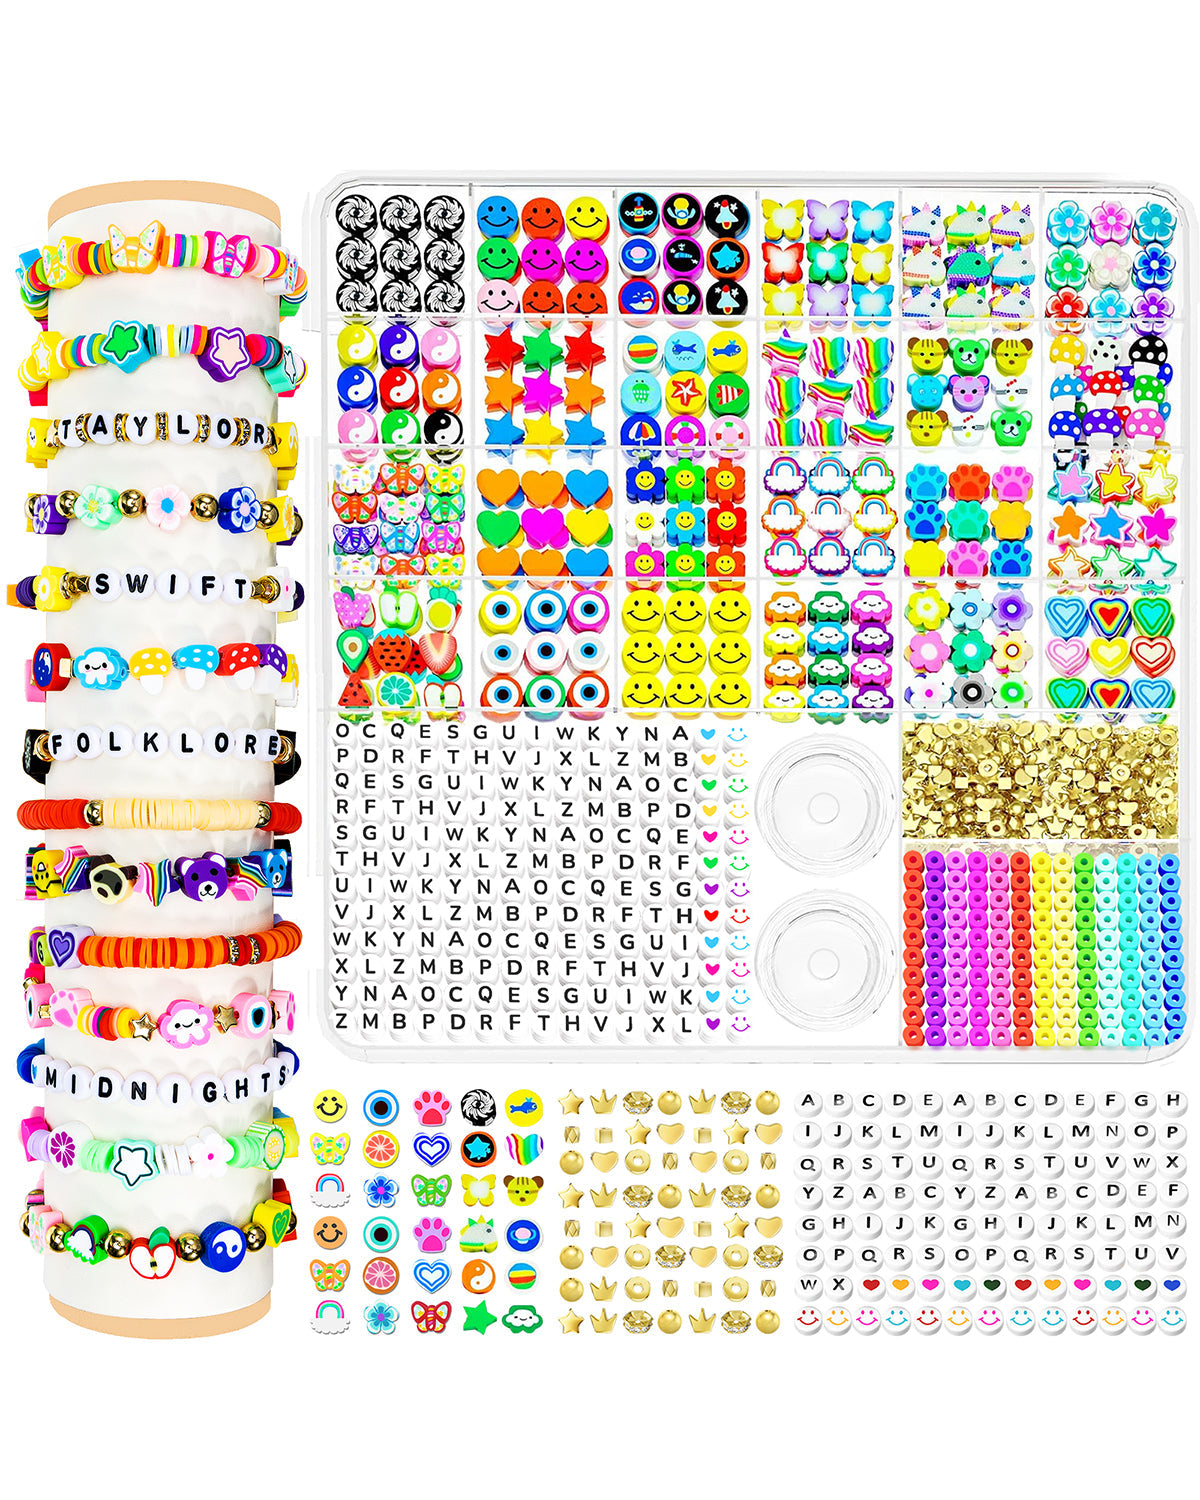 Polymer Clay Beads Friendship Bracelet Making Kit, Including 12 Colors  Beads, Spacer, Elastic Cord For Bracelet & Friendship Beads Crafts